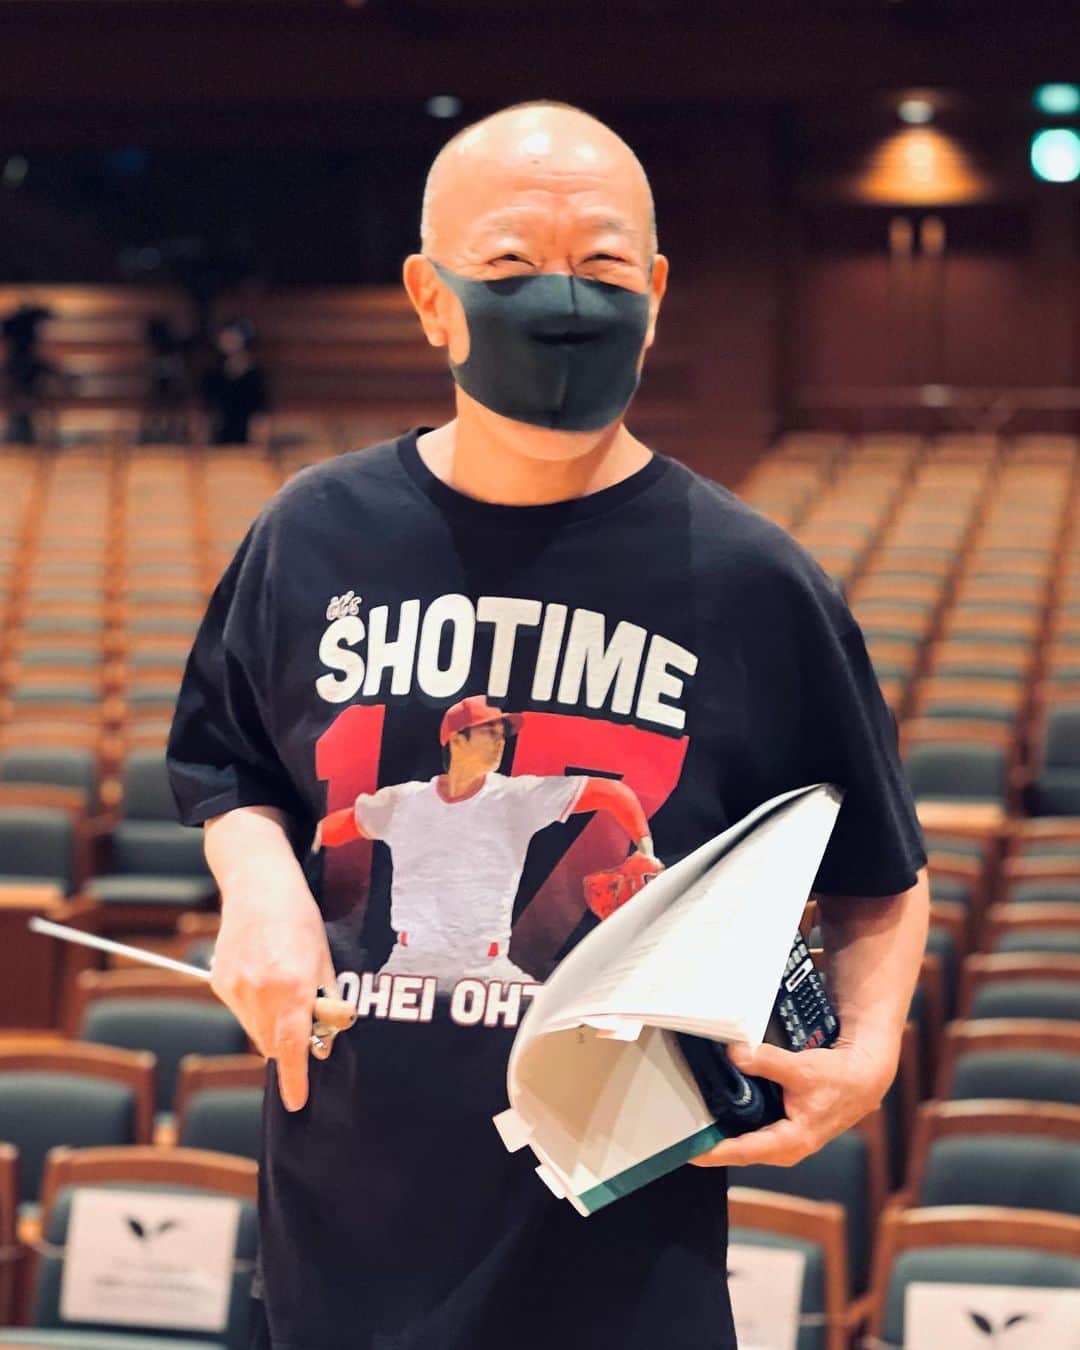 久石譲さんのインスタグラム写真 - (久石譲Instagram)「_and then #shotime  JH : 2 Dances for Large Ensemble  *World premiere The last song is “2 Dances” composed by myself. Composed of 2 dance rhythms: my approach to minimalism, and a patterned approach. It may seem easy to listen to, but the rhythm structure is intricate, making the performance difficult. The piece was also considered to keep the motive minimal, for the senses in the ear to focus on the rhythm changes.  Lastly, 2 Dances is composed of dance rhythms, but may be difficult to dance to. If there is someone who can dance it, I would love to see the performance.  久石譲：2 Dances for Large Ensemble  最後は僕の新しい曲で「2 Dances」。 ２つのダンスリズムを使って、自分なりのミニマル的、パターン的なアプローチをかけた作品です。一見聴きやすそうですが、かなり交錯したリズム構造になっているため演奏は難しい。 使用モチーフを最小限にとどめることでリズムの変化に耳の感覚が集中するように配慮したつもりです。 最後に…2 Dancesはダンスのリズムを使用した楽曲ですが、これで踊るのはとても難しいと思う。 もし踊る人がいたら、僕は、、絶対観てみたい。  もうすぐ、ショータイム。 JH  . #musicfuture #generalprobe #showtime  #2dances #howdoyoudance #steptoheaven 僕も #二刀流 ? #三刀流 ?」10月8日 15時28分 - joehisaishi_composer